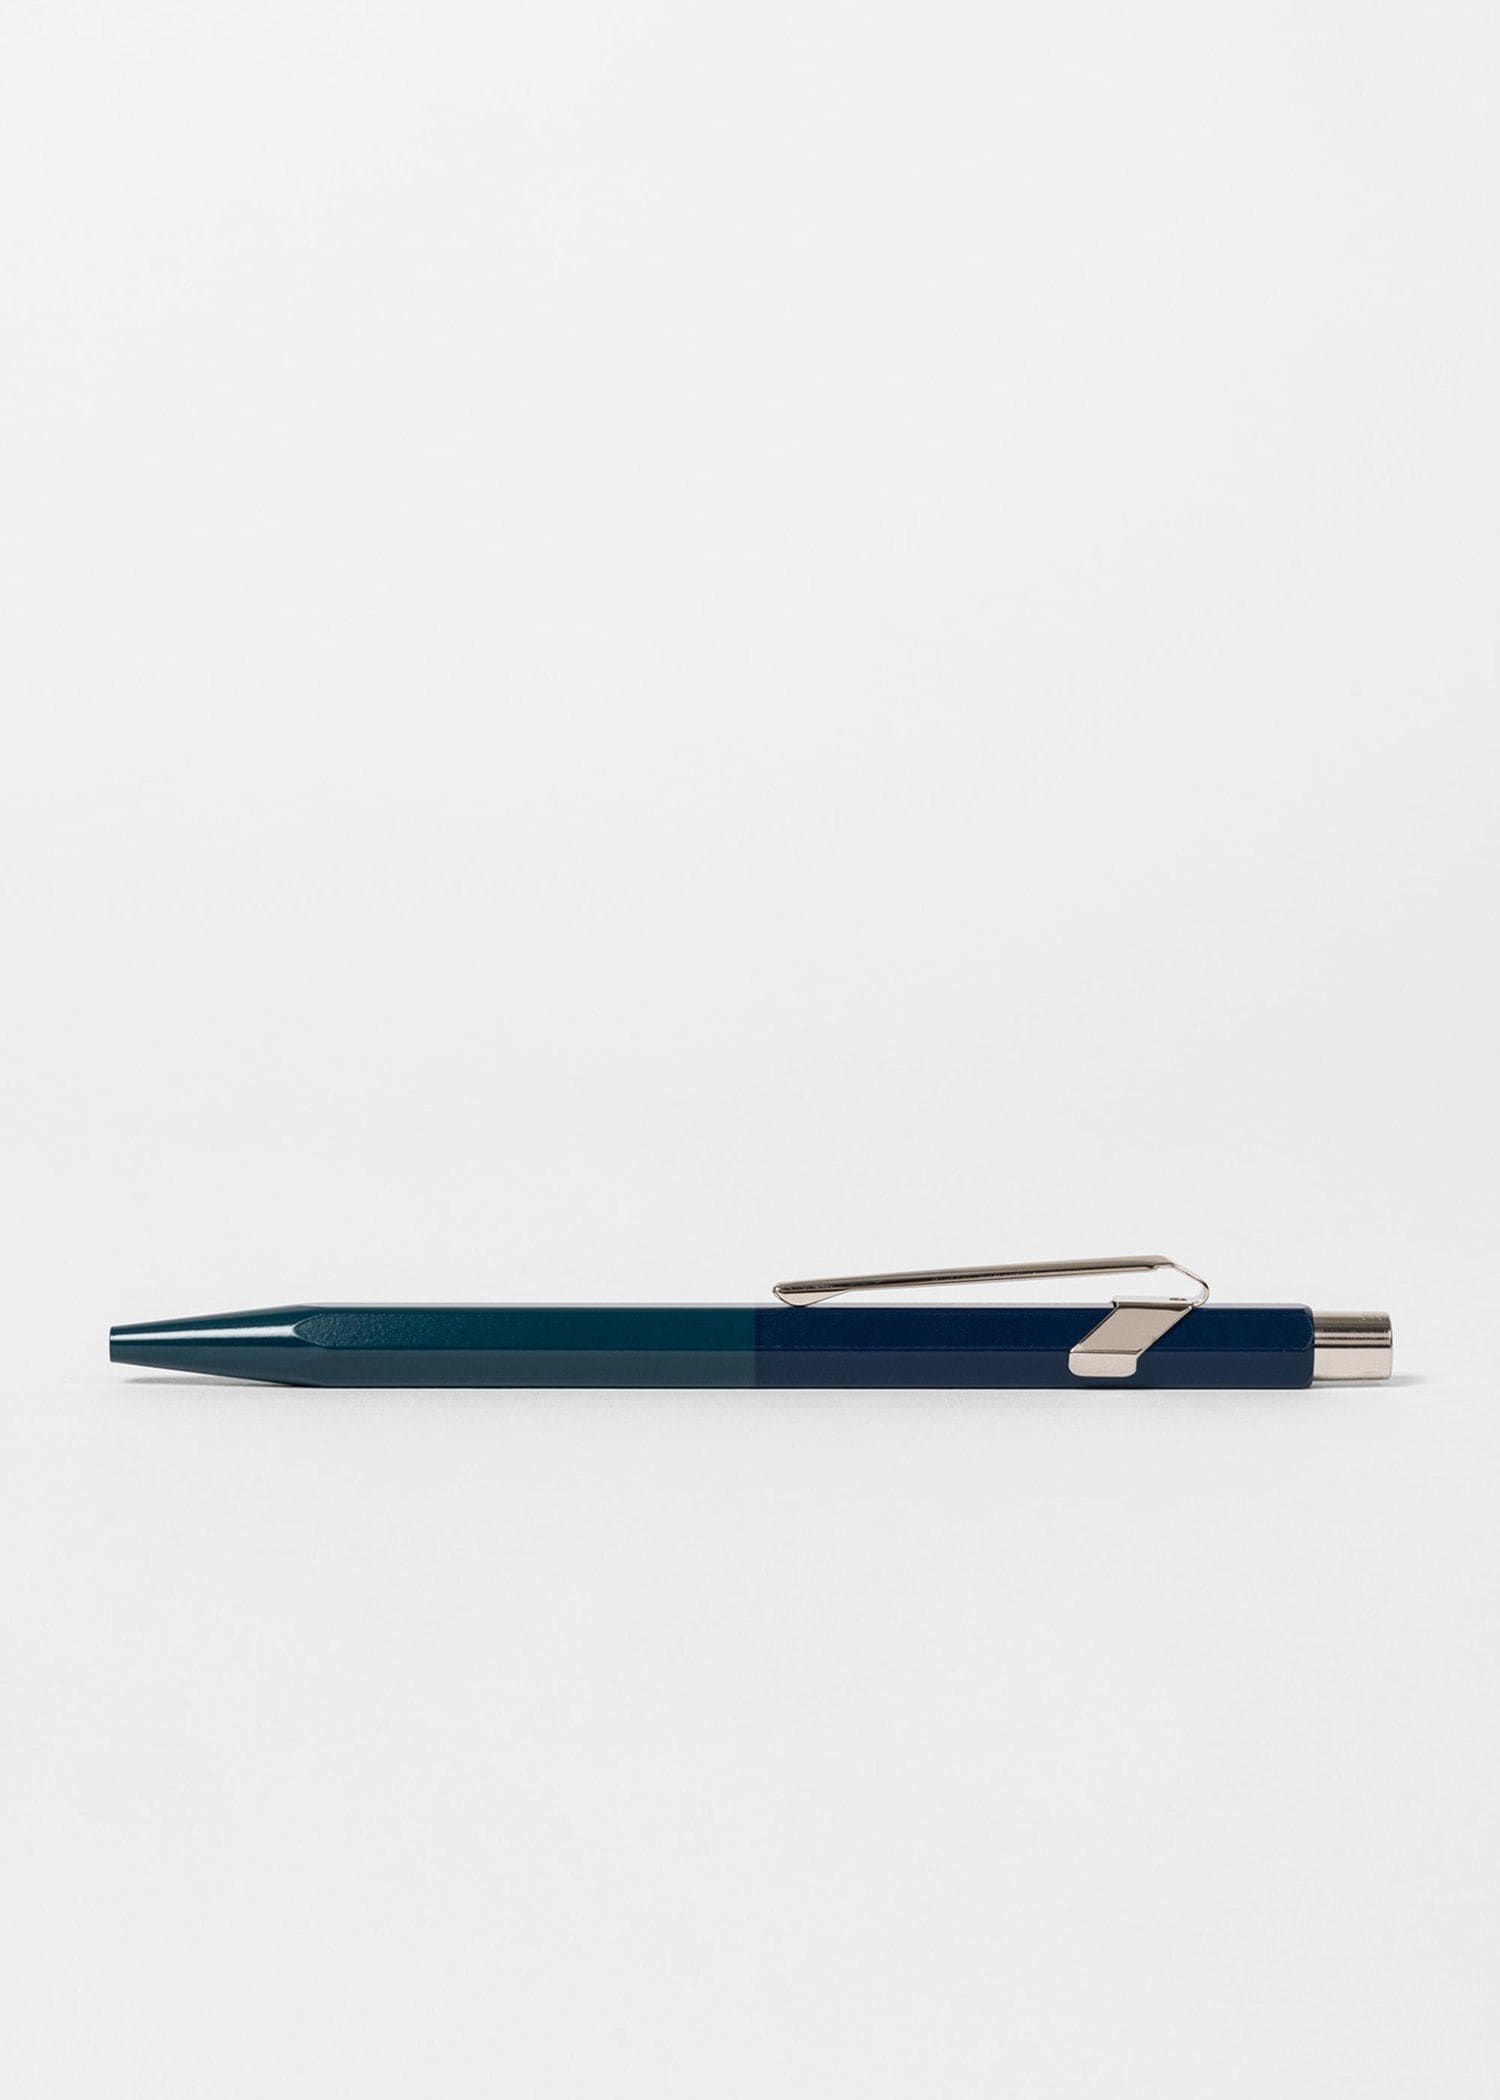 Paul Smith and Caran d'Ache ボールペン